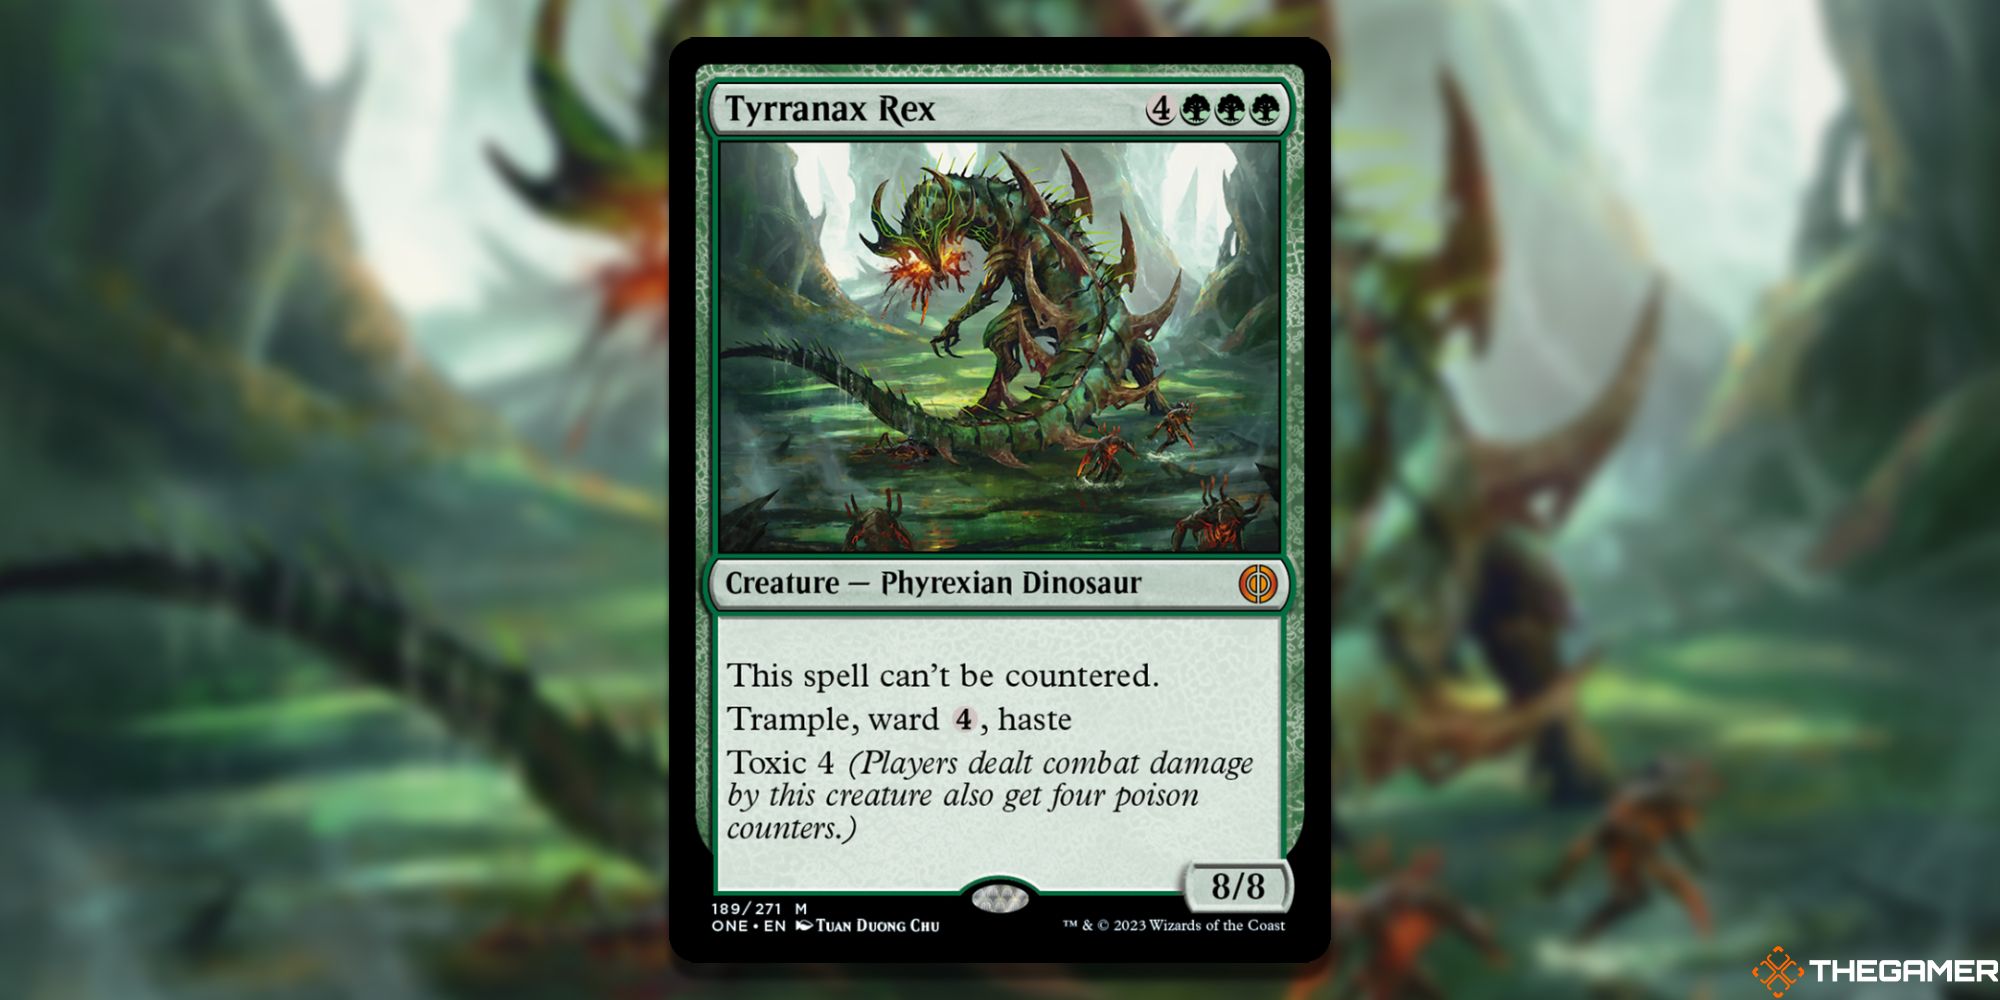 Image of the Tyrranax Rex card in Magic: The Gathering, with art by Tuan Duong Chu